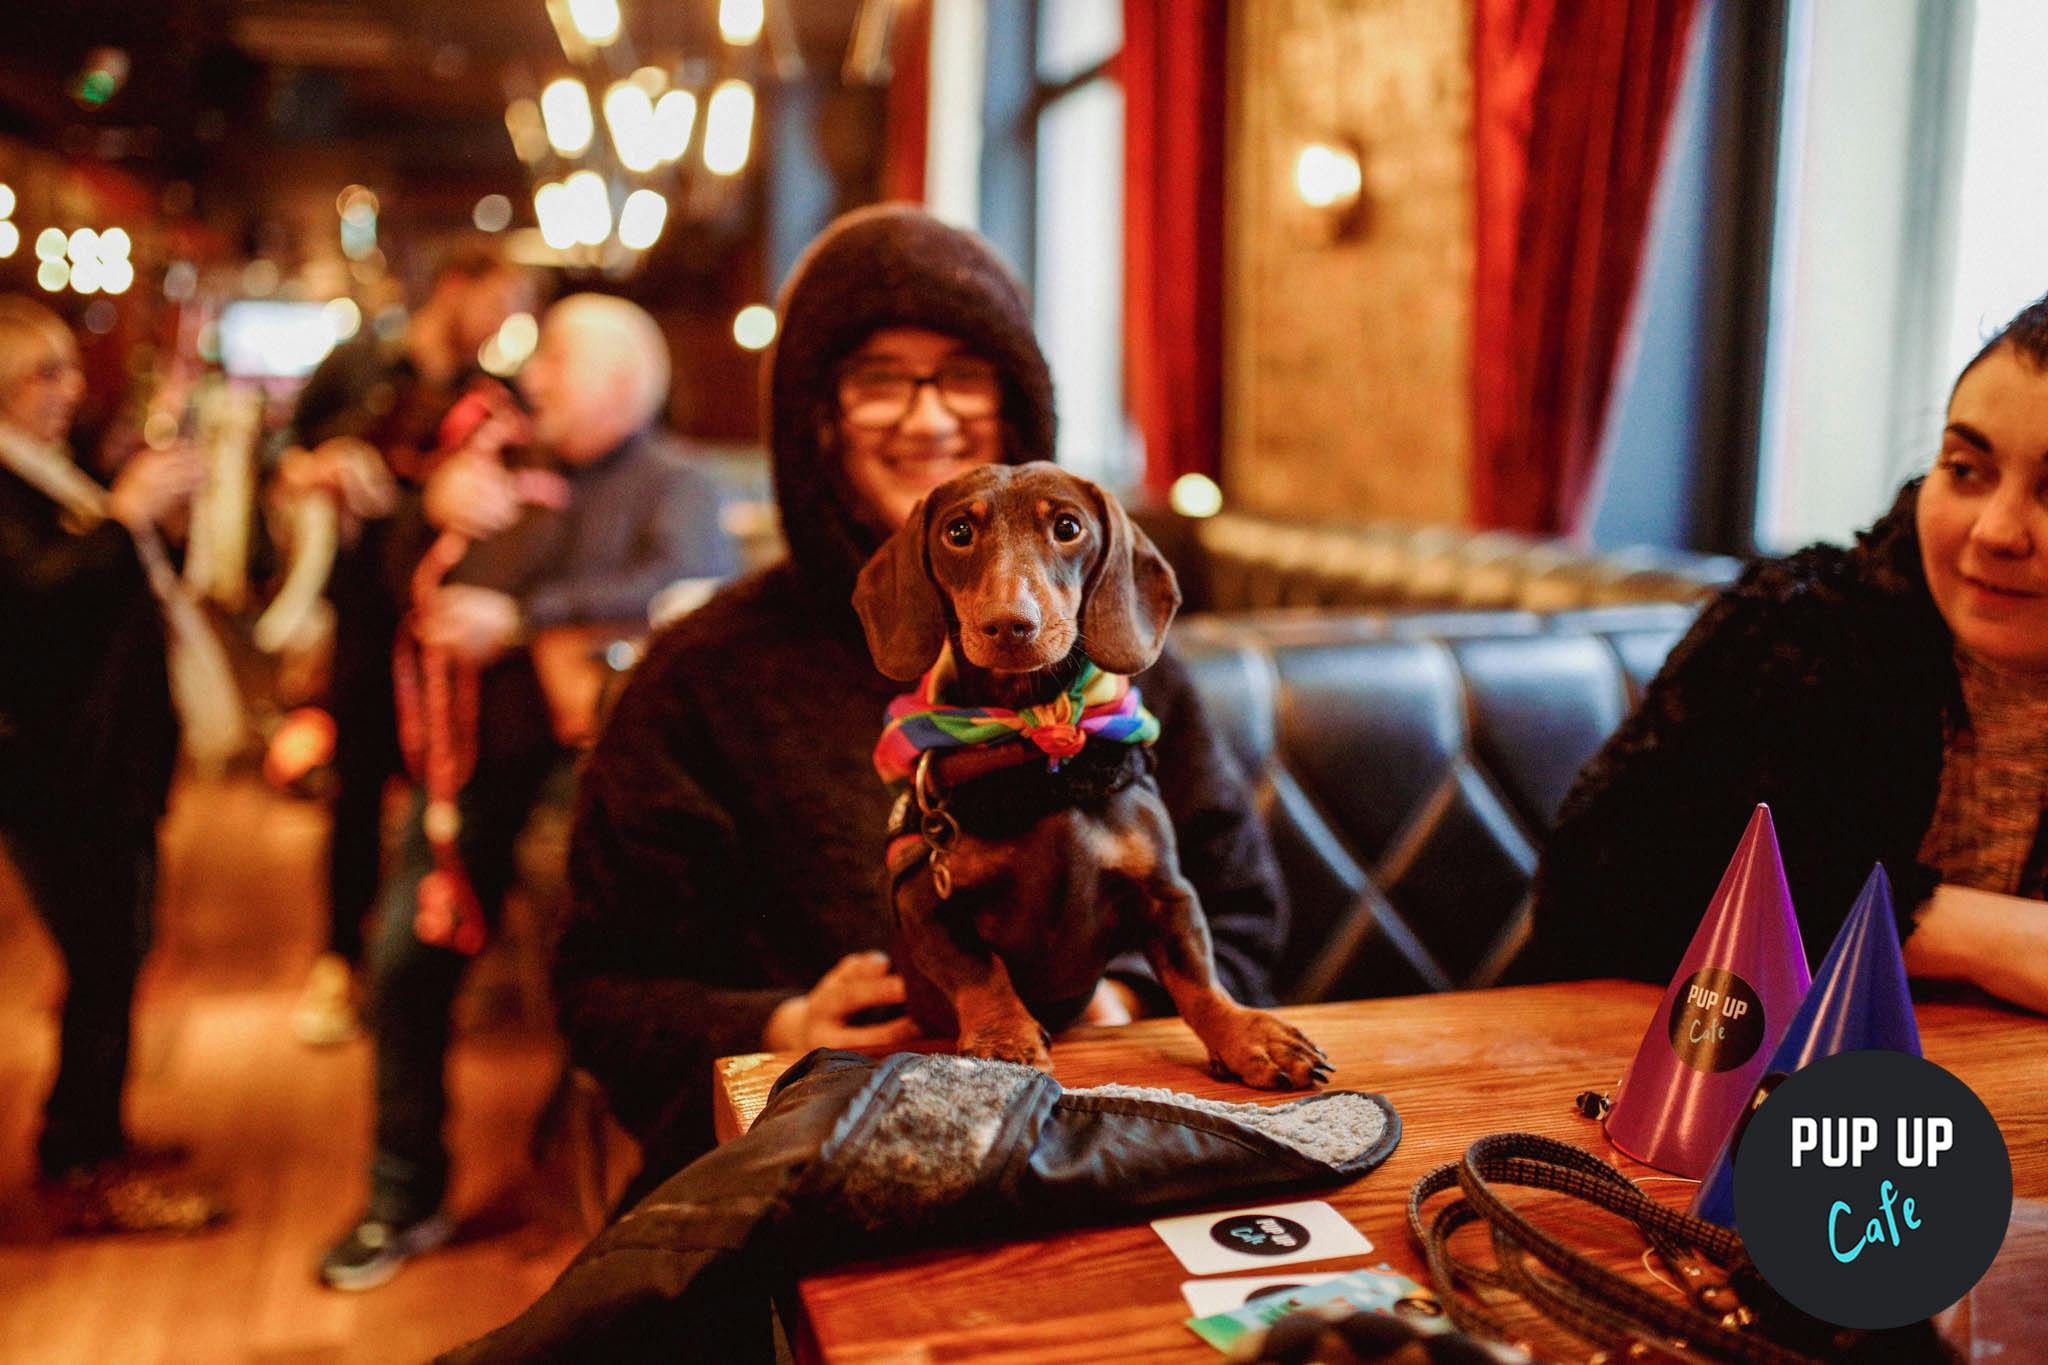 Much loved sausage dog cafe returning to Liverpool on Easter Sunday!